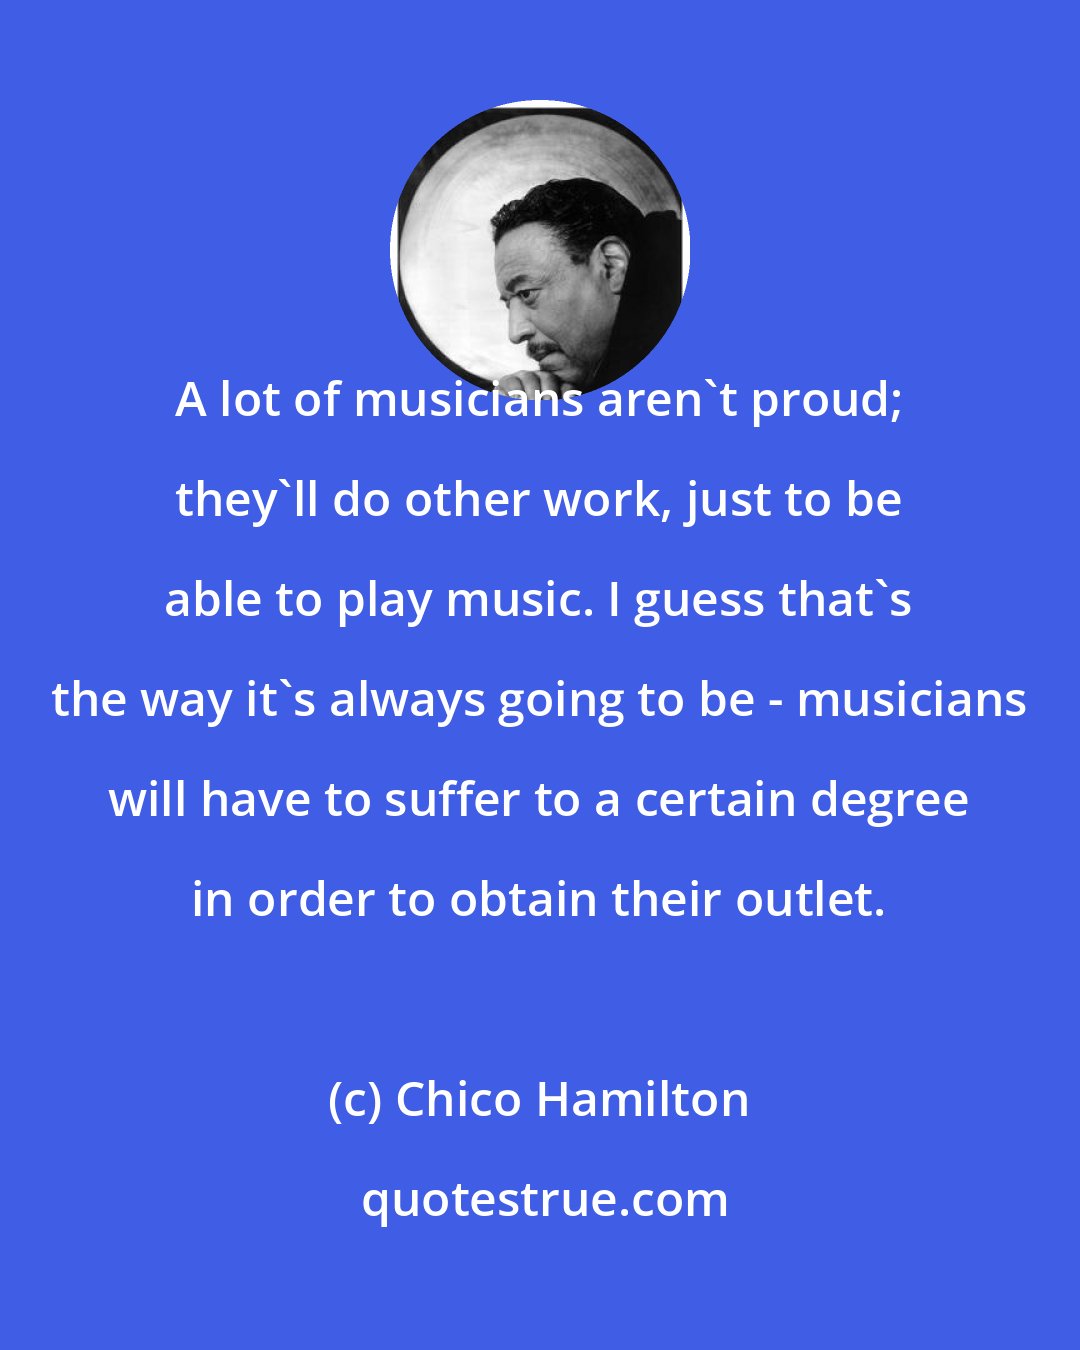 Chico Hamilton: A lot of musicians aren't proud; they'll do other work, just to be able to play music. I guess that's the way it's always going to be - musicians will have to suffer to a certain degree in order to obtain their outlet.